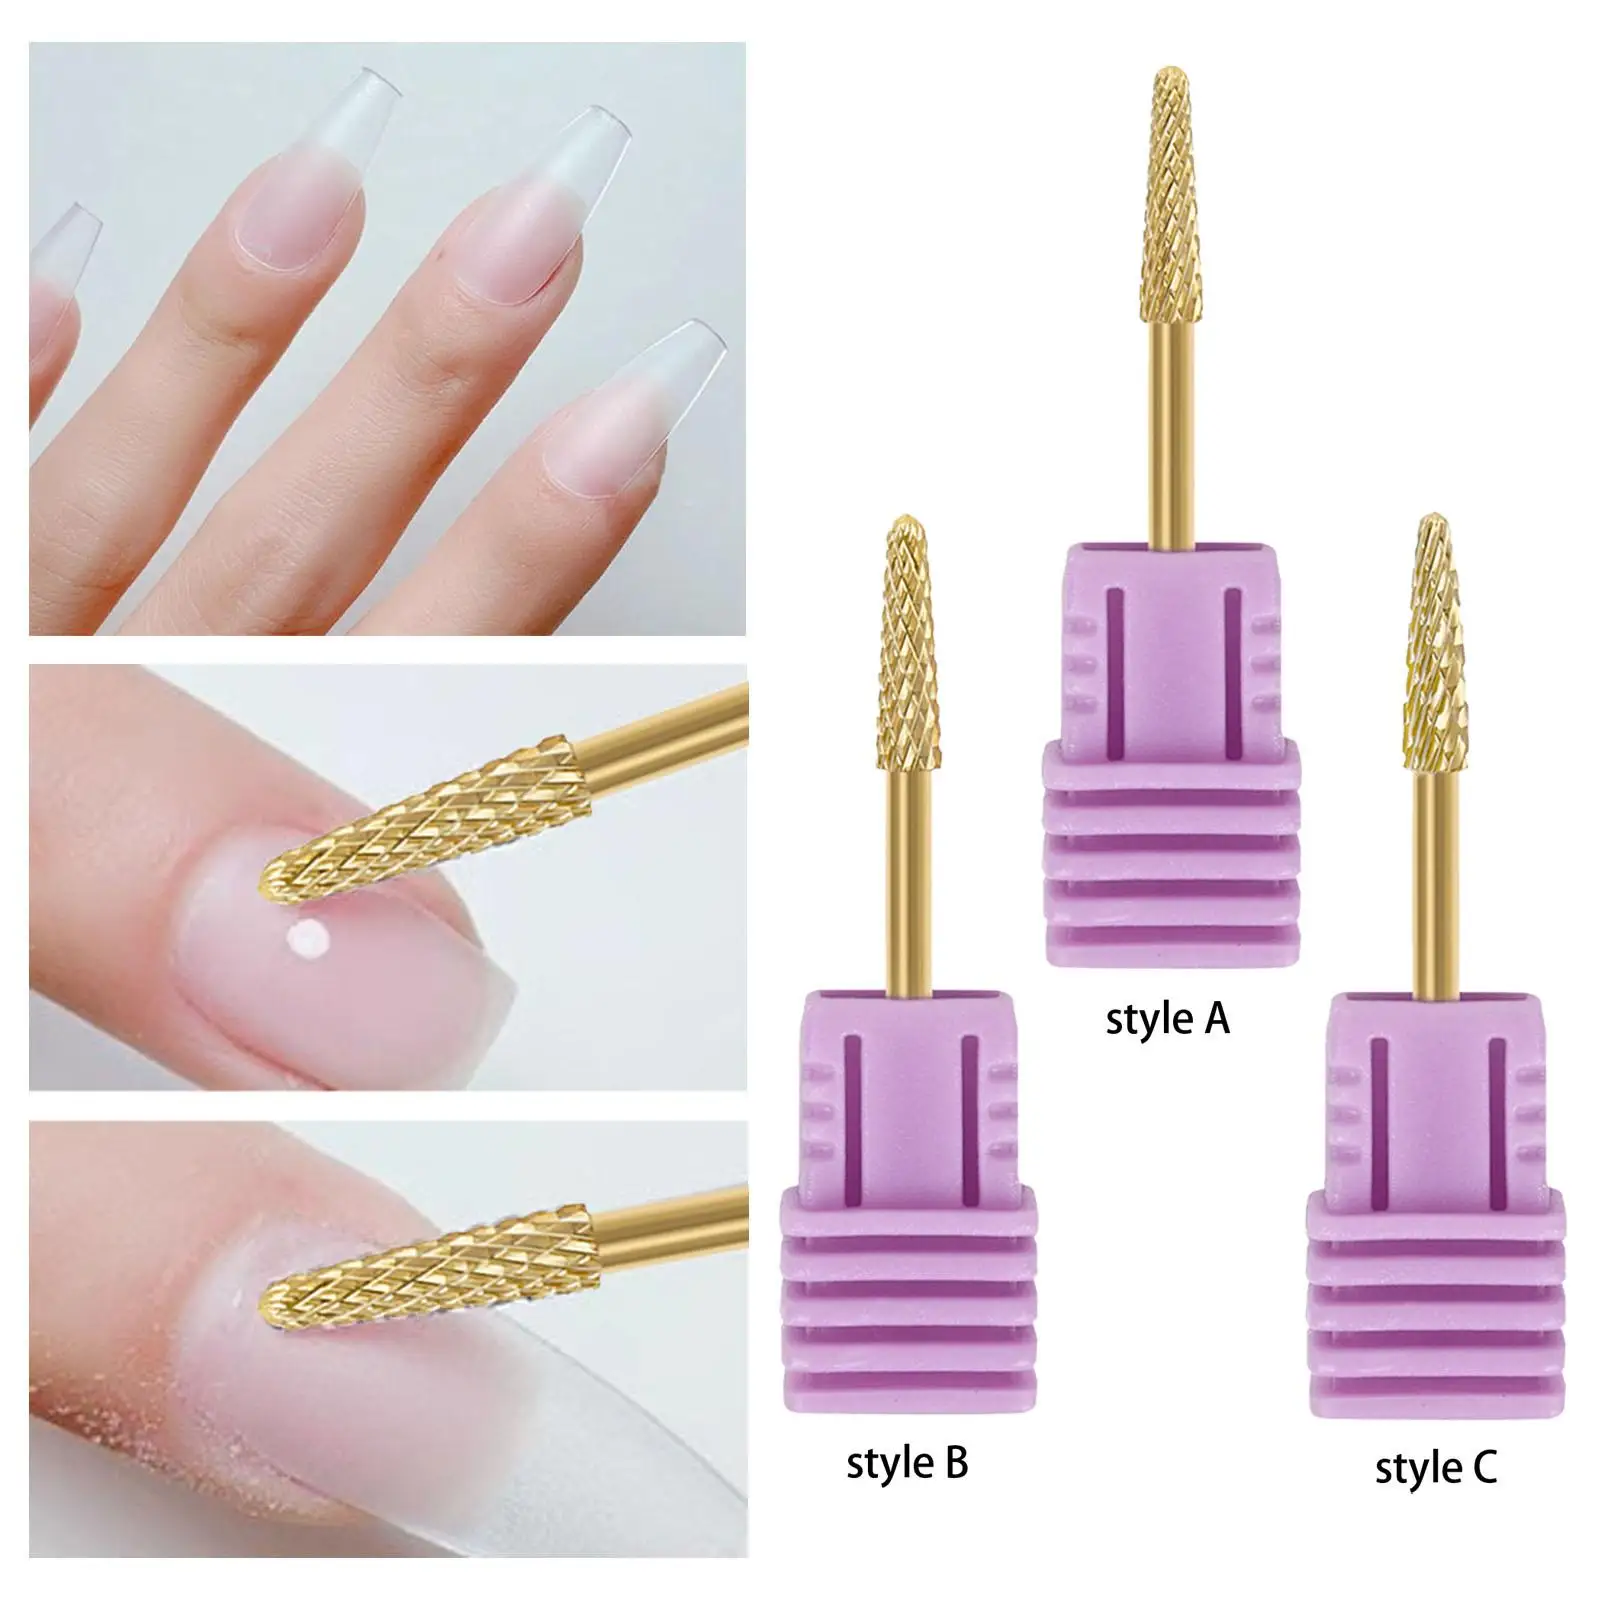 3mm Nail Sanding Bands Mandrel Nail Drill Accessories Portable Tungsten Steel Nail Drill Mandrel for Manicure Pedicures Manicure